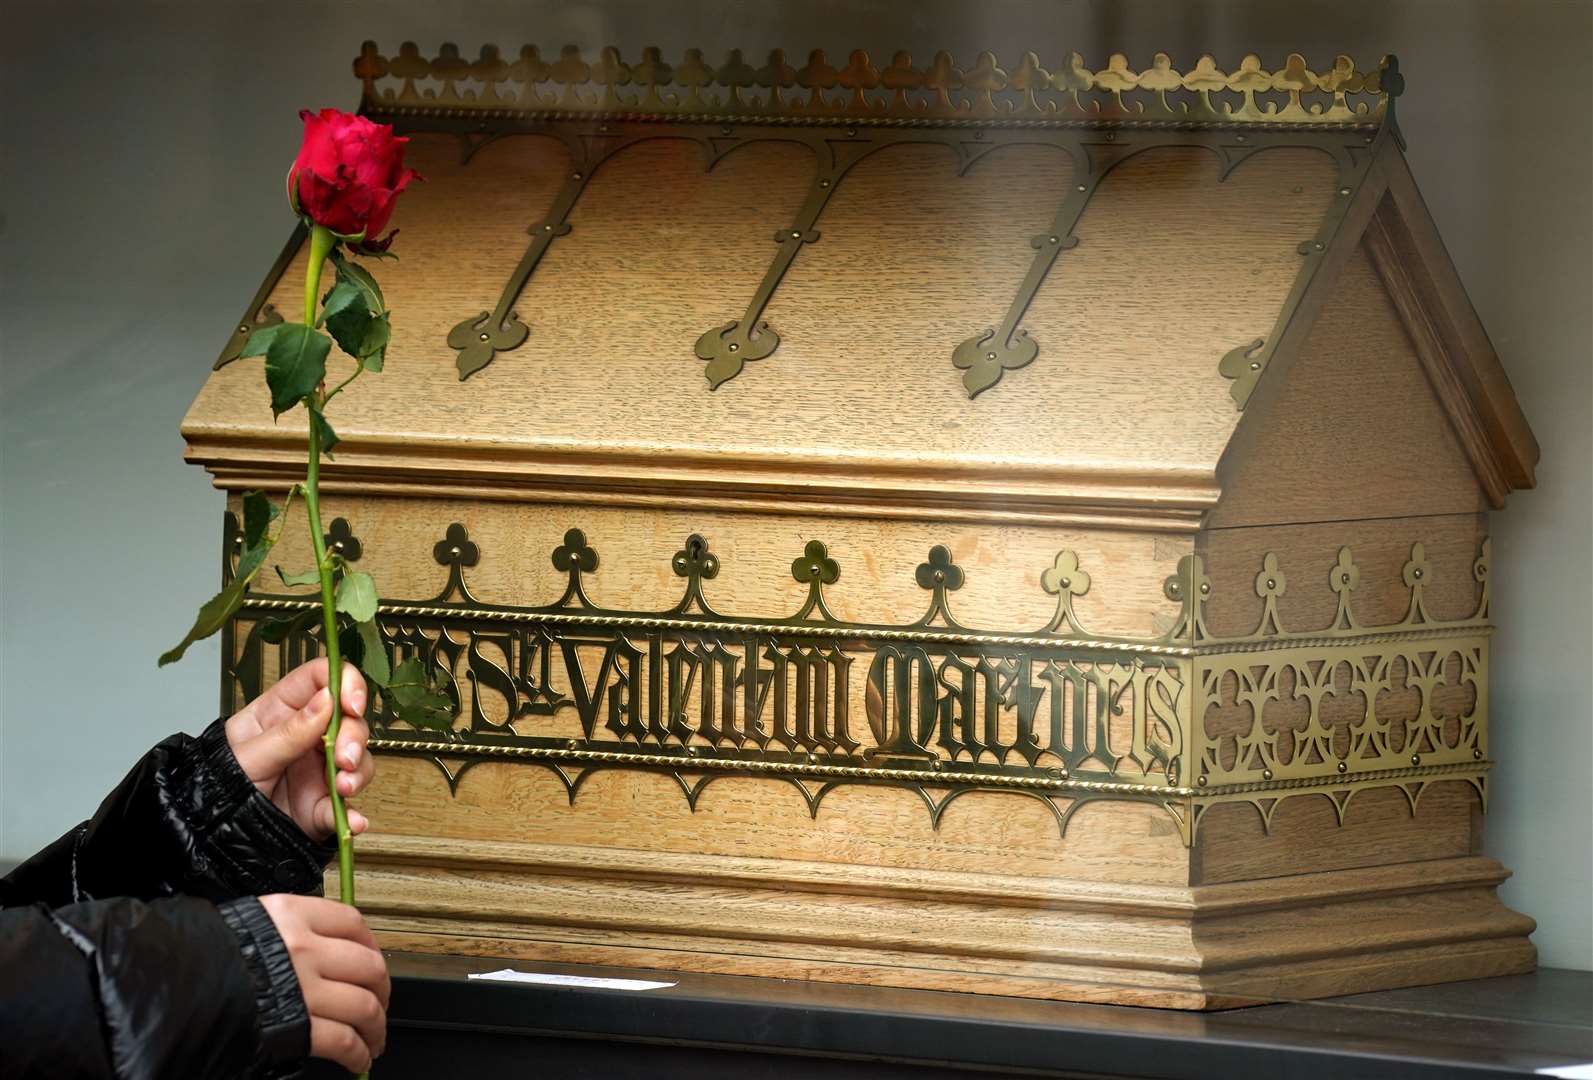 Visitor Yuki Fan holds a rose beside the chest containing bones belonging to St Valentine at the Blessed John Duns Scotus church in the Gorbals, Glasgow (Andrew Milligan/PA)